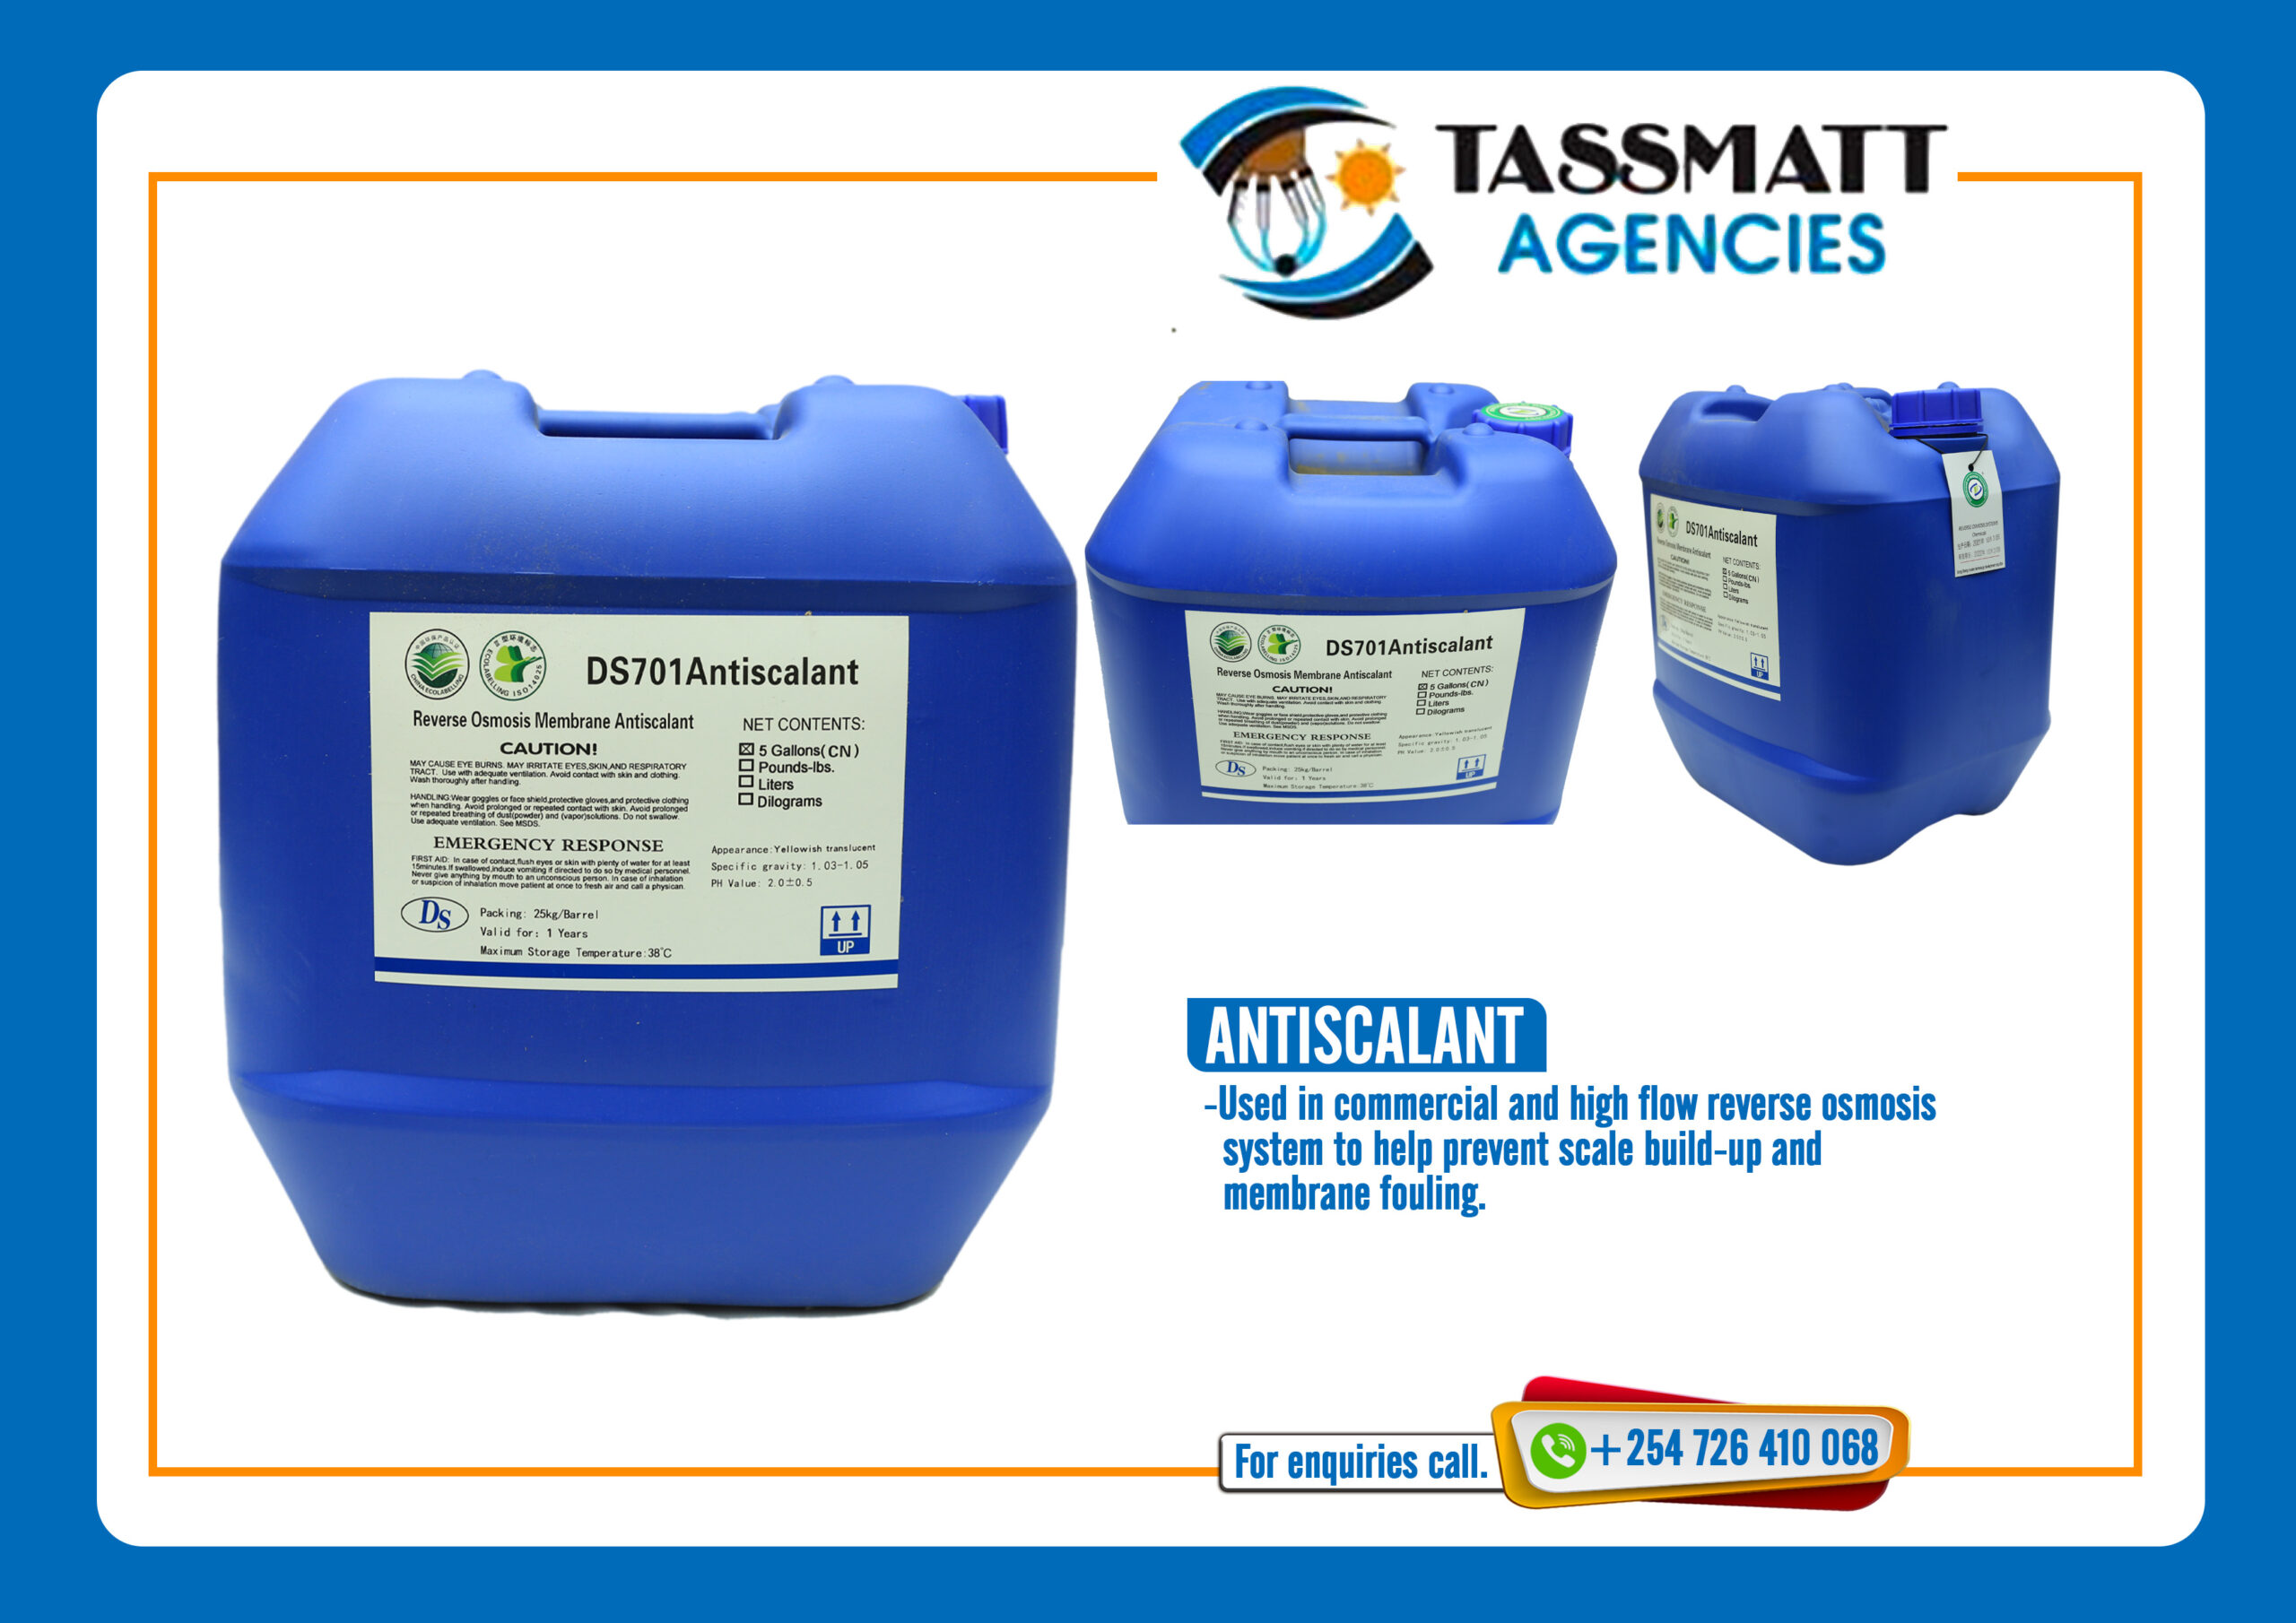 How Tassmatt’s Antiscalants Shield Your RO Membranes from the Scourge of Scale